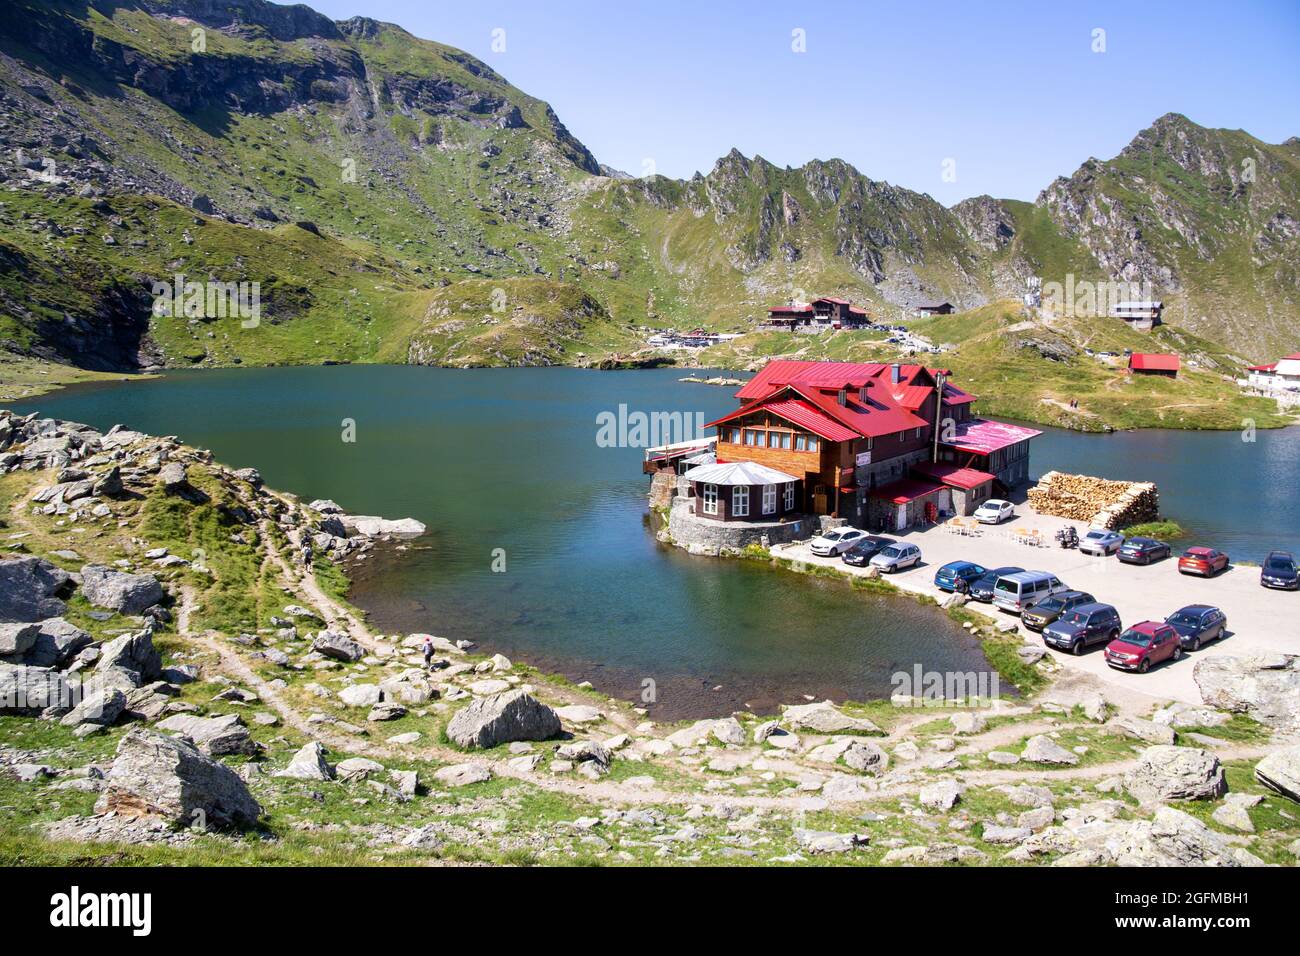 Romania: Lake Balea (Romanian: Balea Lac) from above. The lake is located  at the top of the pass on the Transfagaras High Road in the Fagaras  Mountain Stock Photo - Alamy